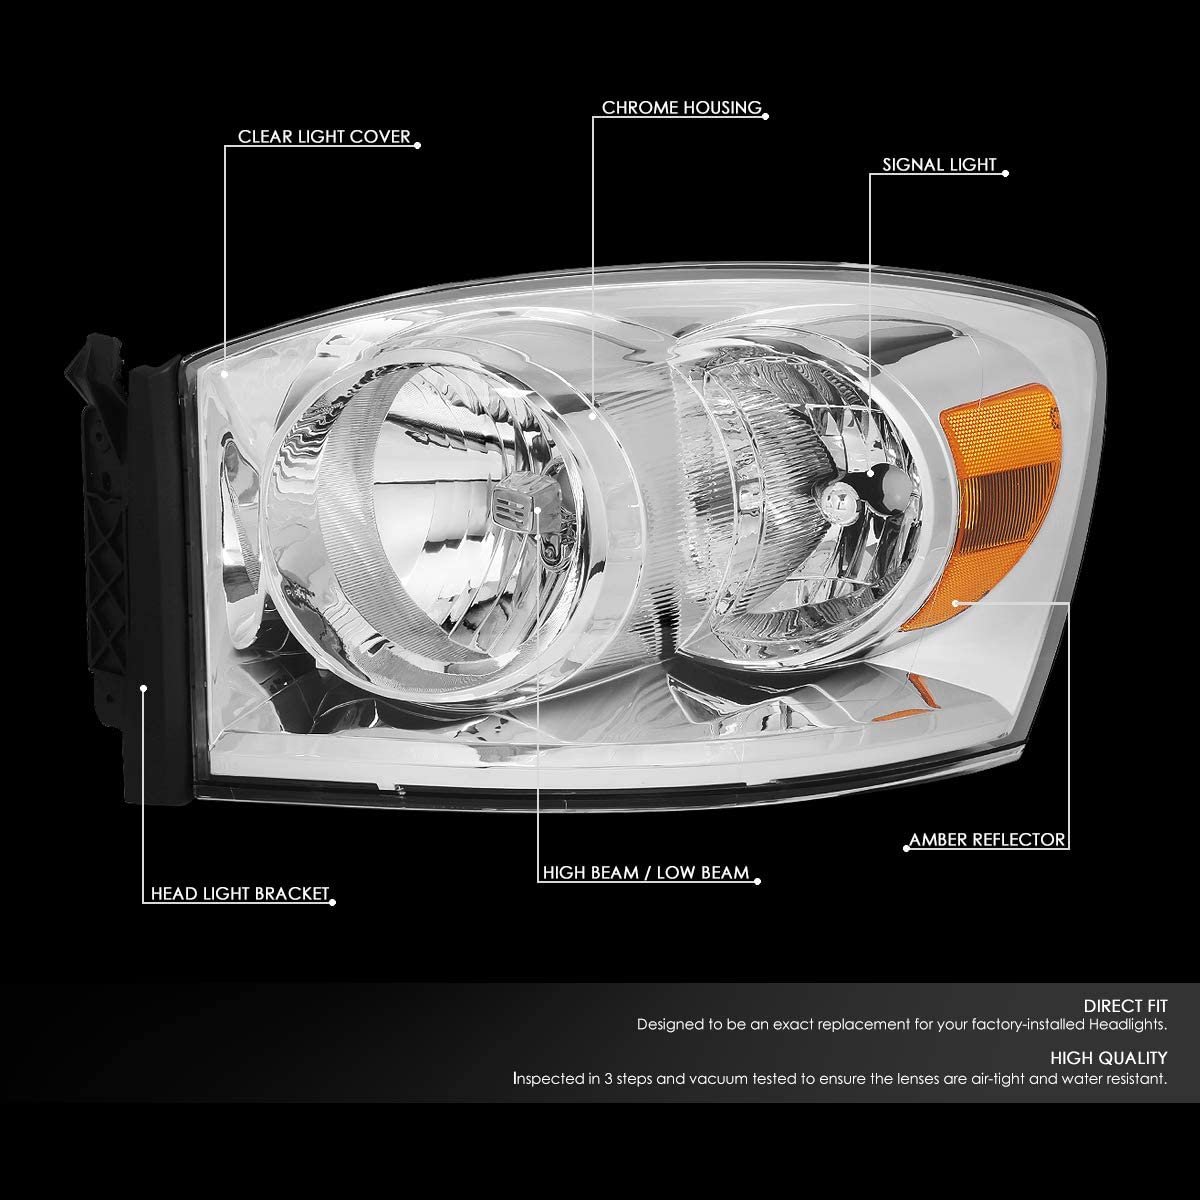 Auto Dynasty Factory Style Headlights Compatible with 06-09 Dodge Ram 1500 2500 3500 - Driver and Passenger Side - Clear Lens with Chrome Housing